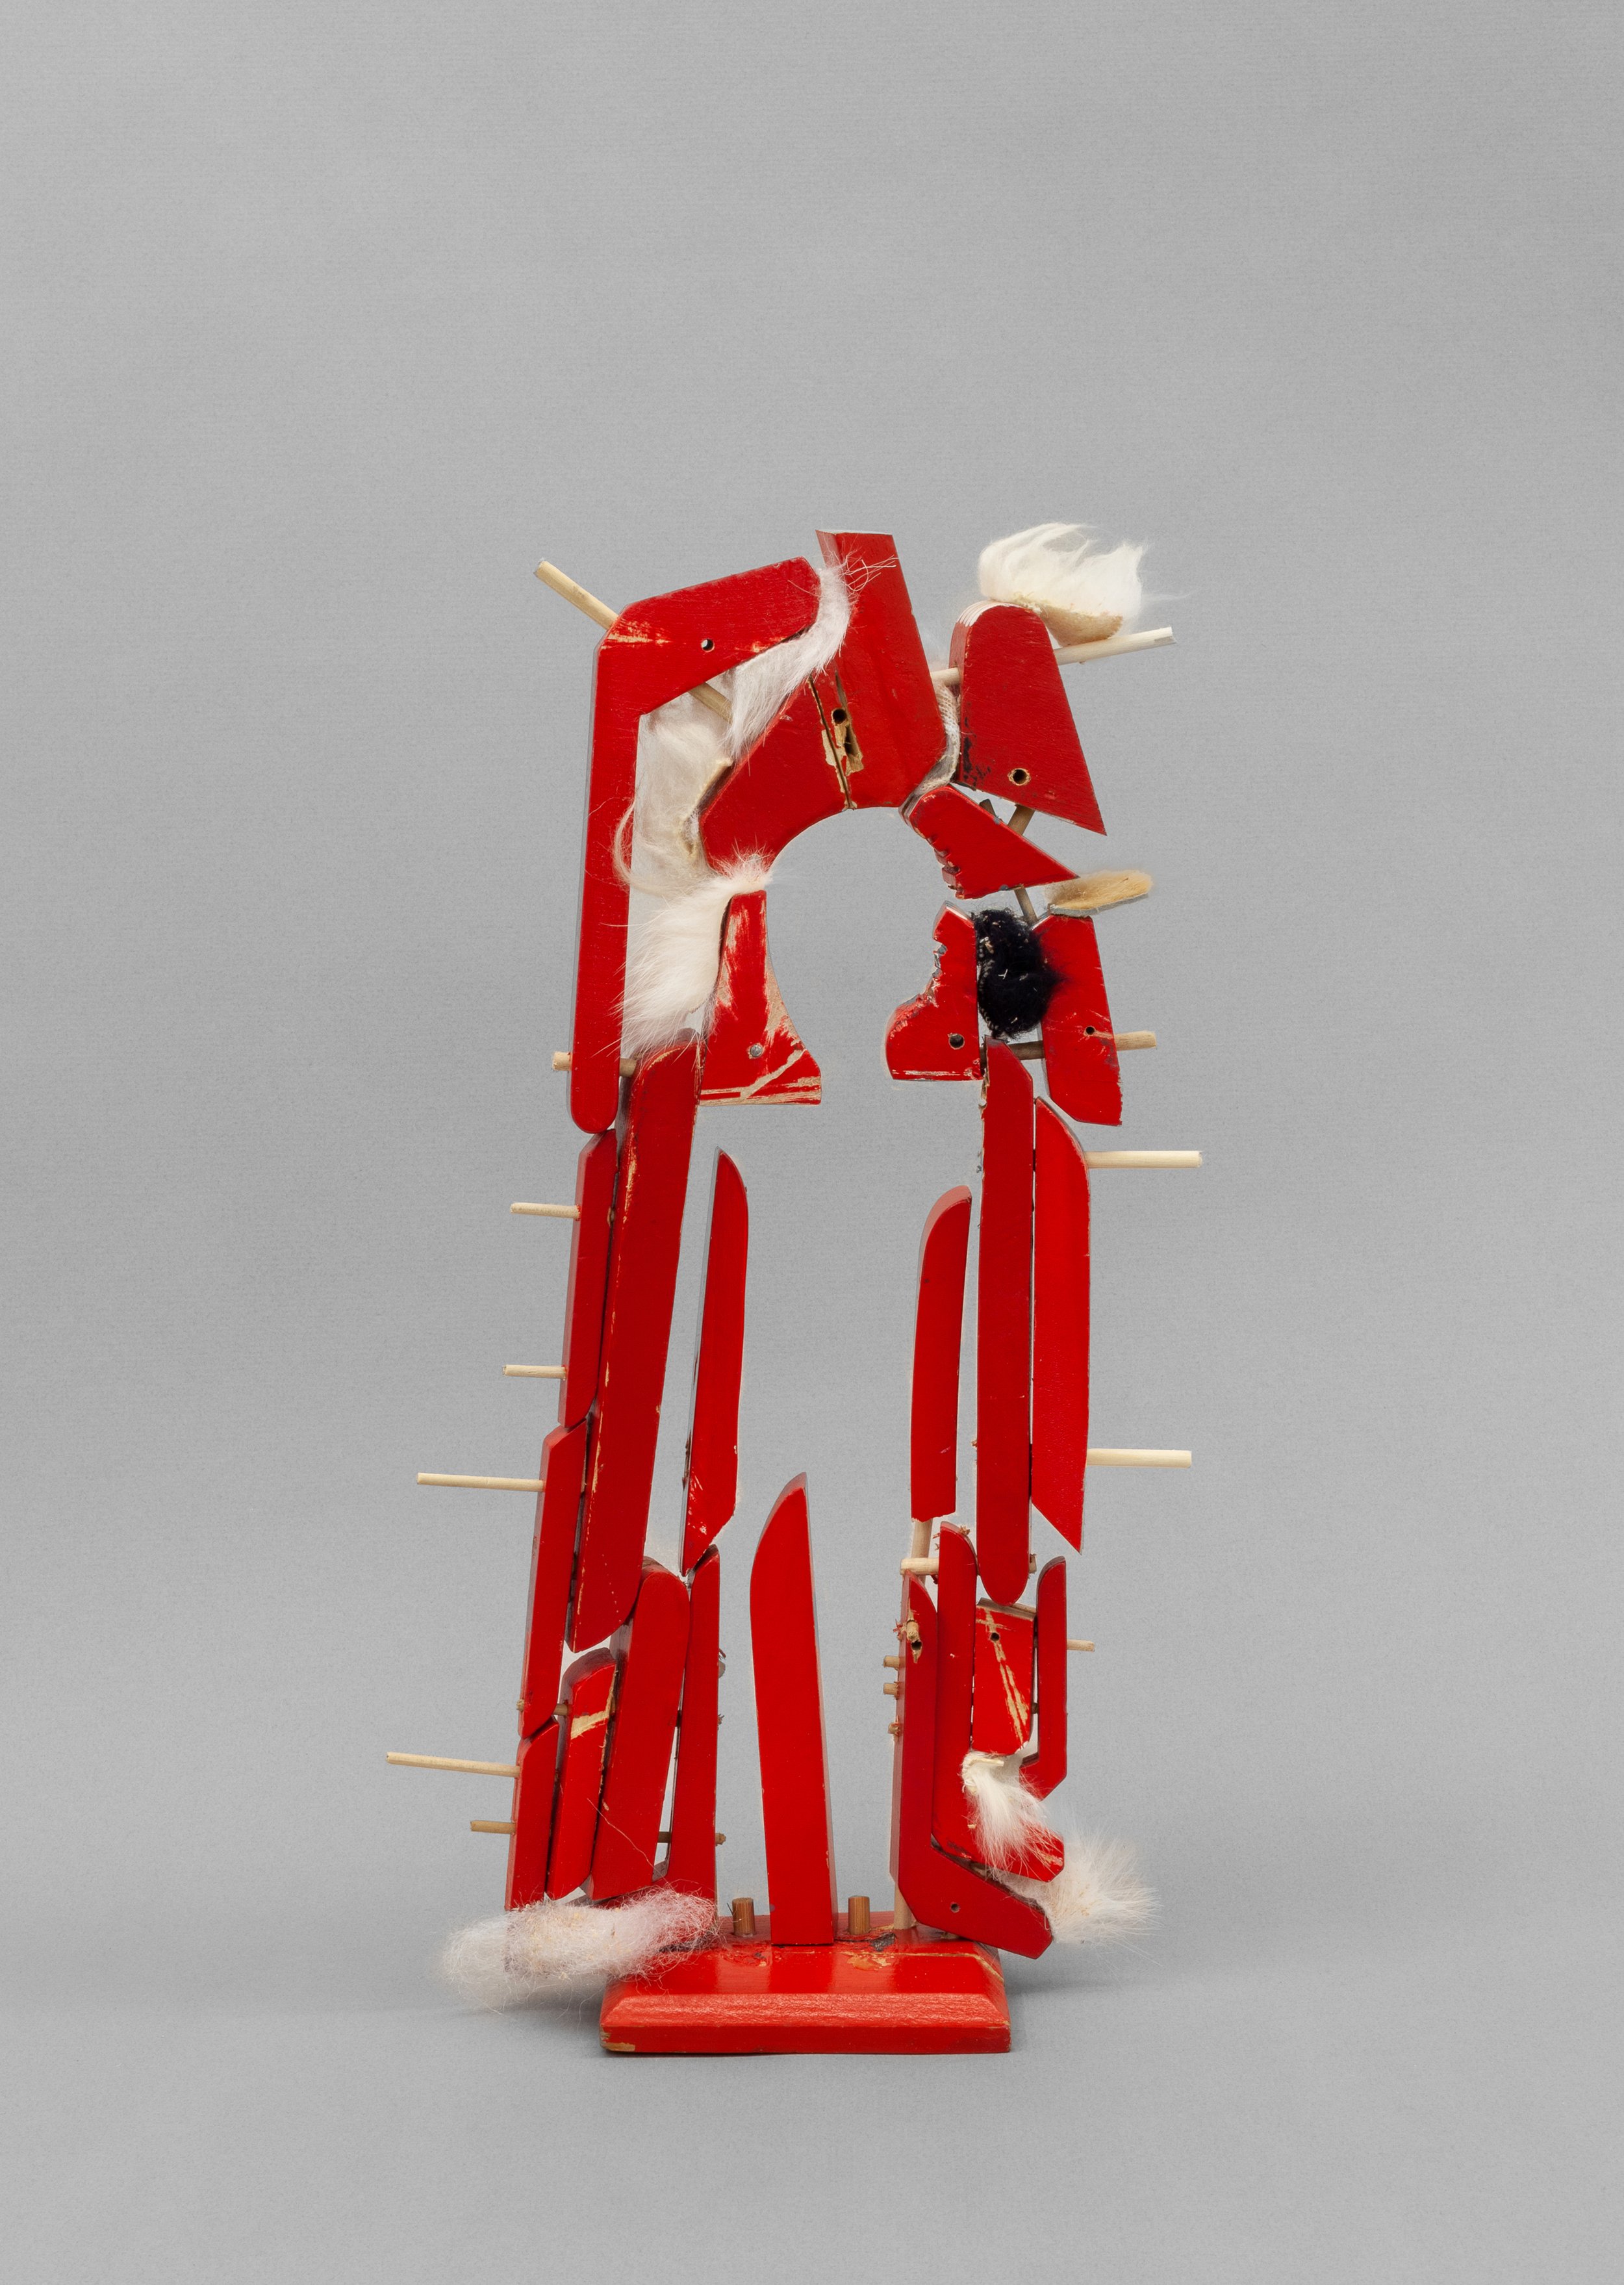   Released Spirit (red) , 2022. Wood, paint, faux fur. 15 x 8 x 3 in 